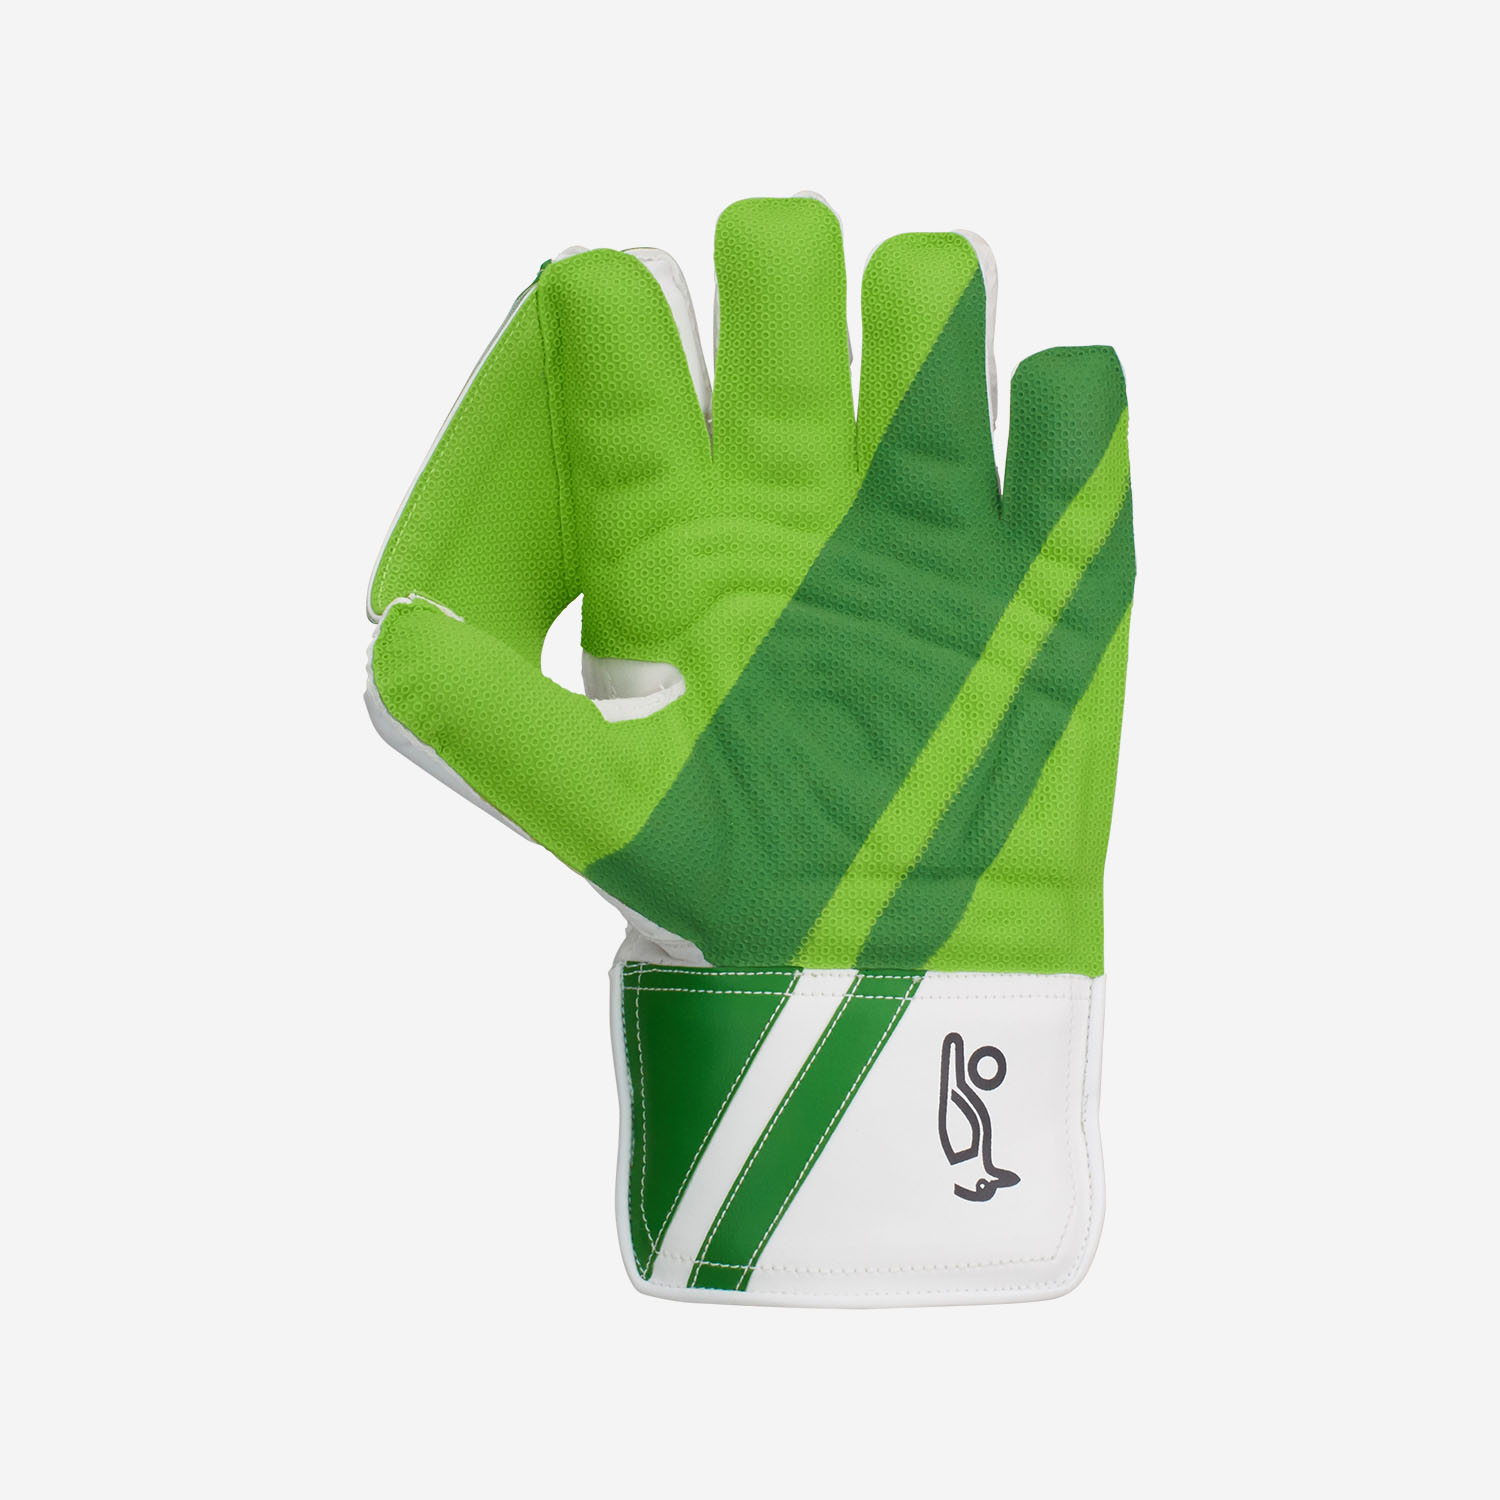 LC 3.0 WICKET KEEPING GLOVE